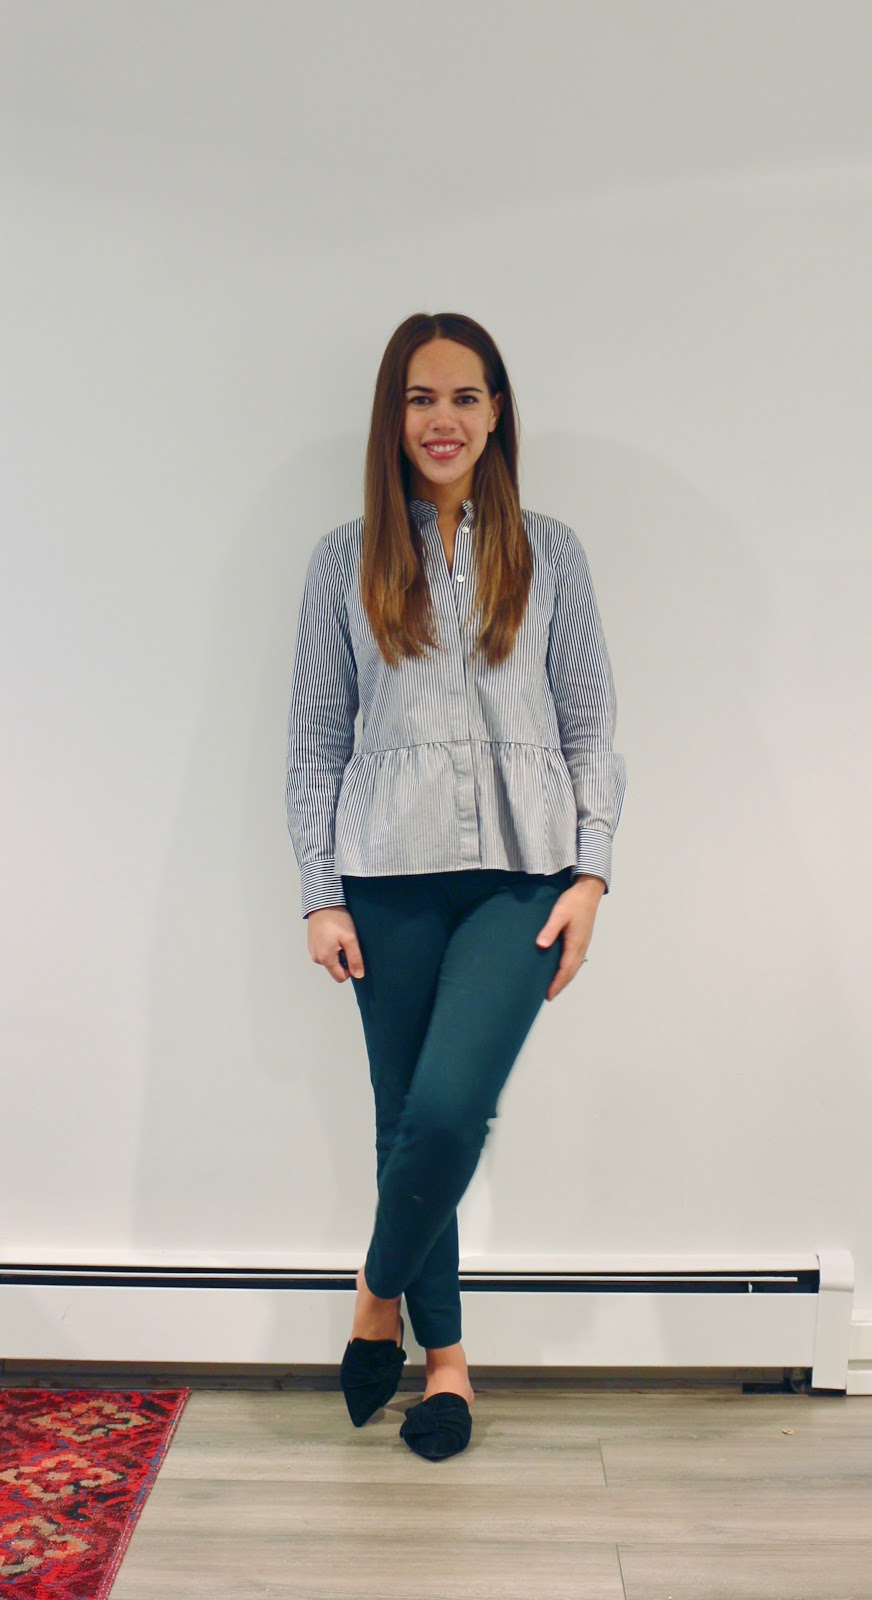 Jules in Flats - J.Crew Striped Peplum Button Up (Business Casual Fall Workwear on a Budget) 